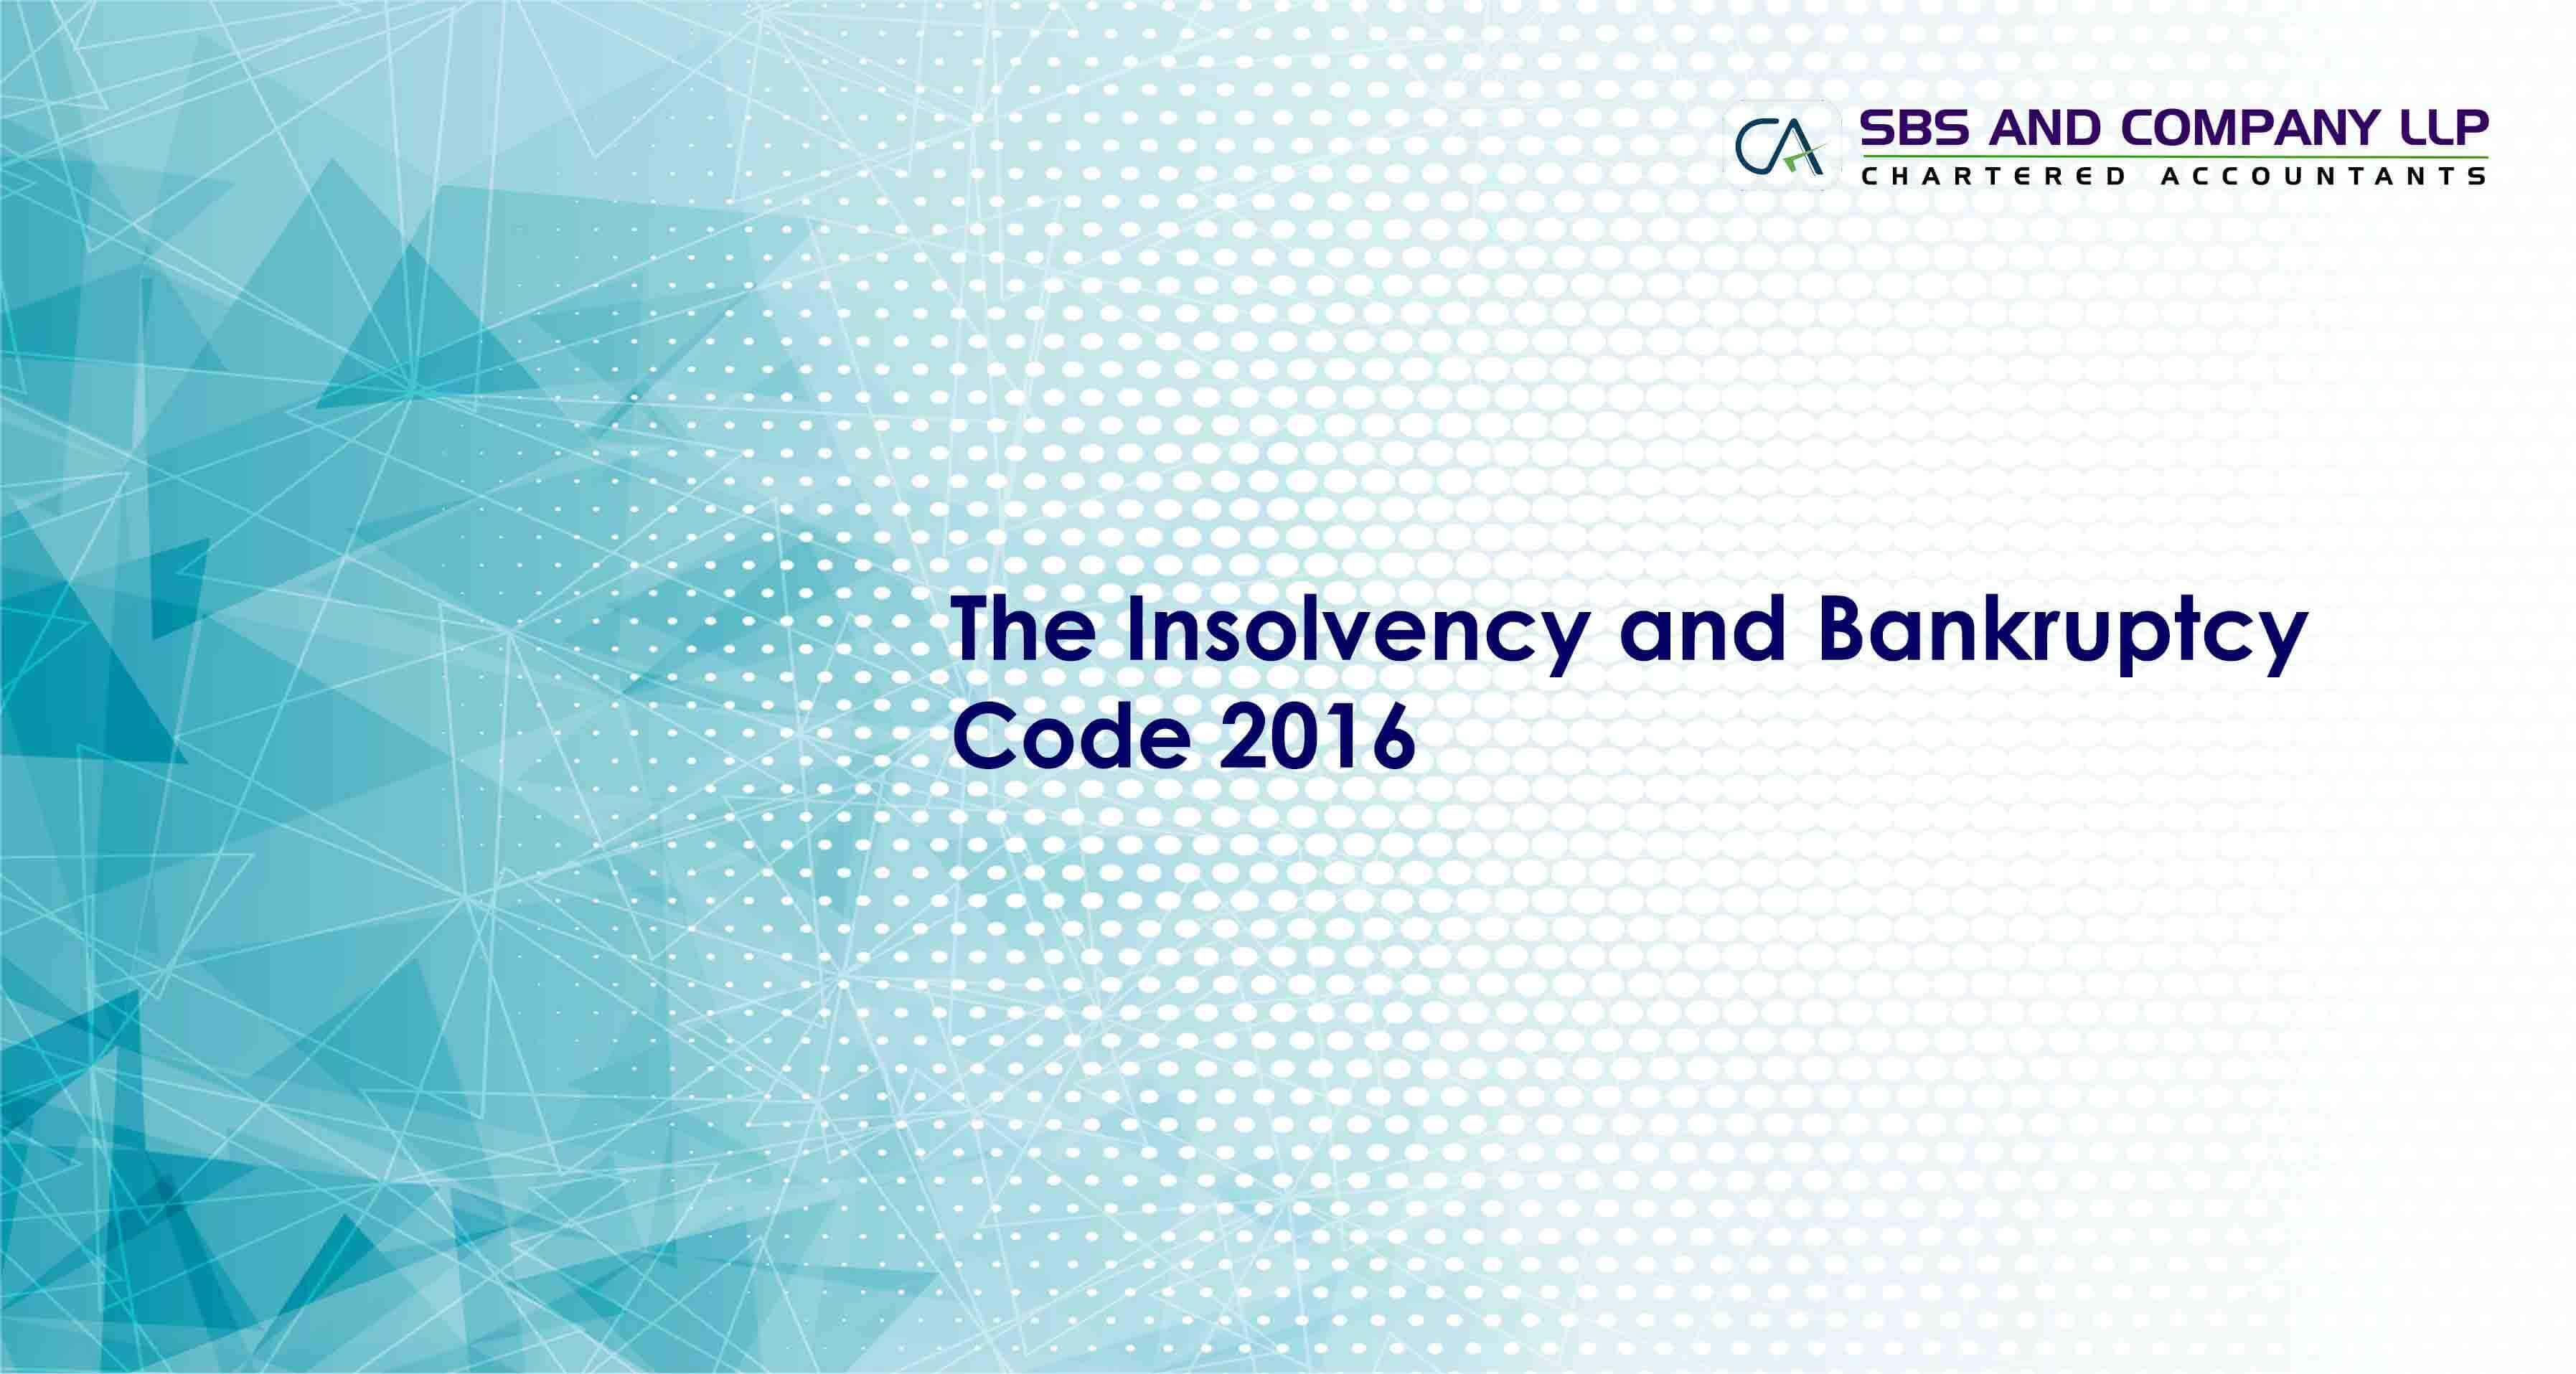 The Insolvency and Bankruptcy Code 2016